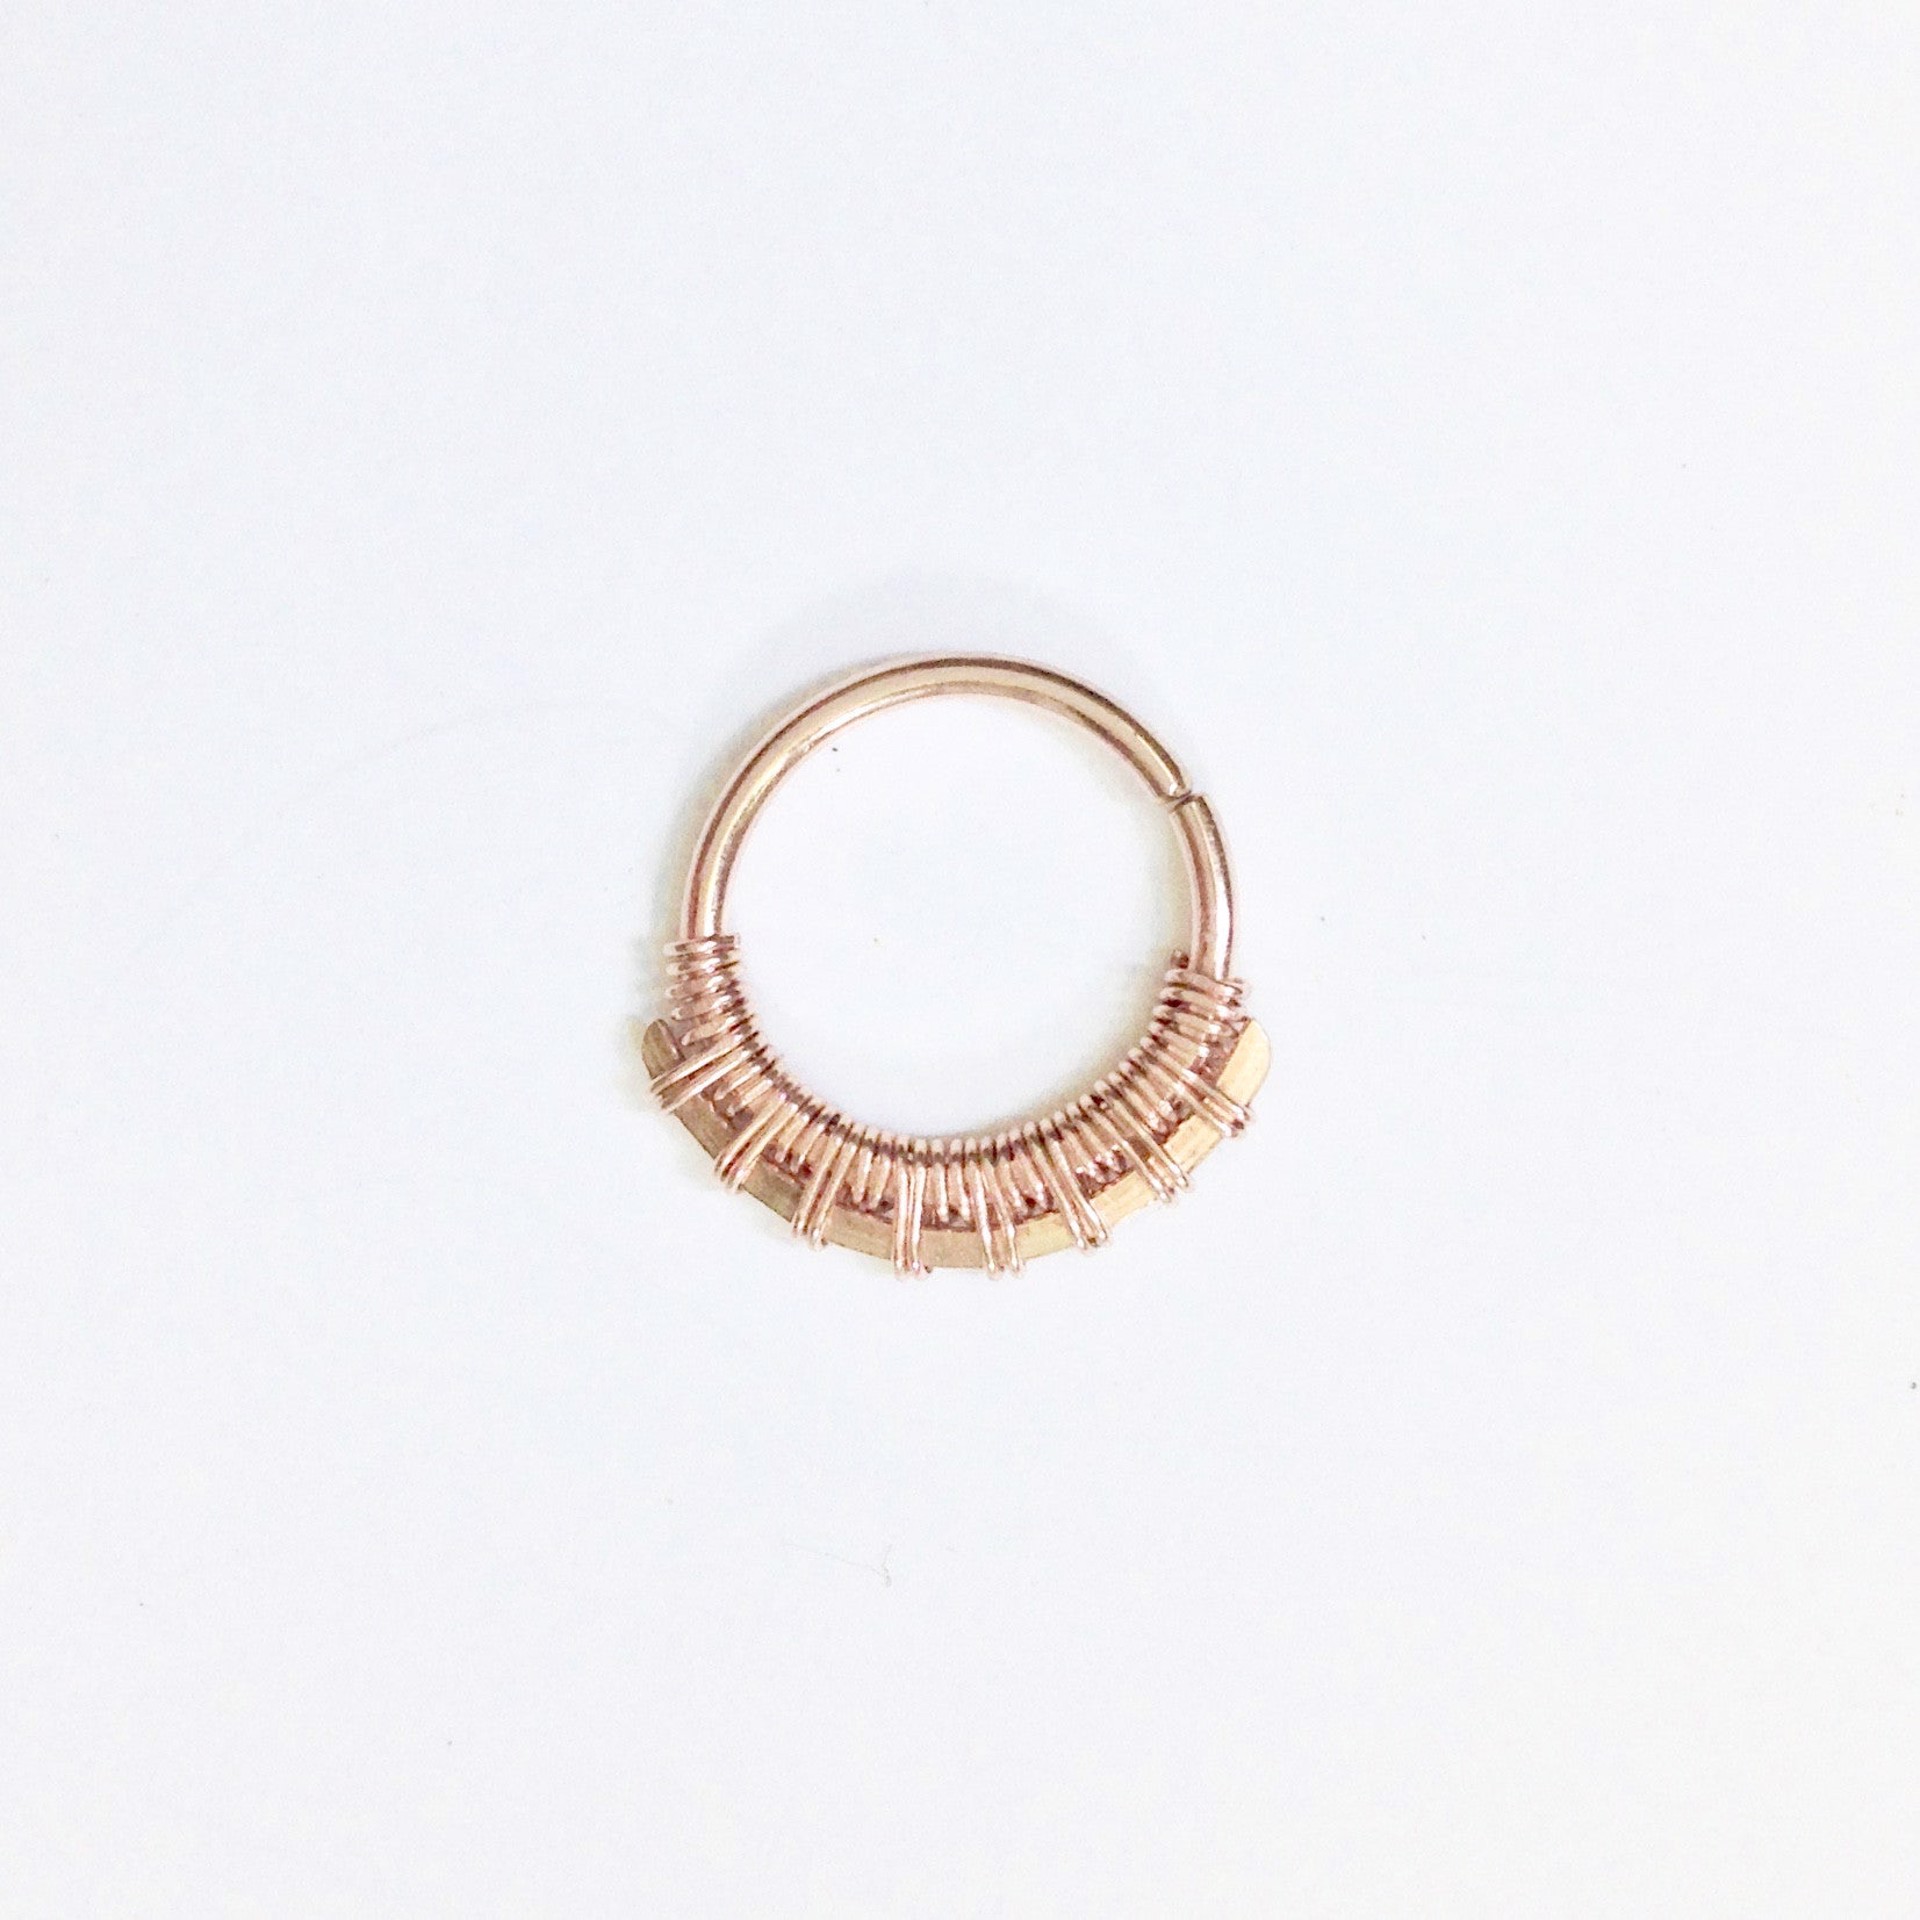 Sundara Septum Ring- Gold - 6mm / 20 by Clementine & Co. Jewelry